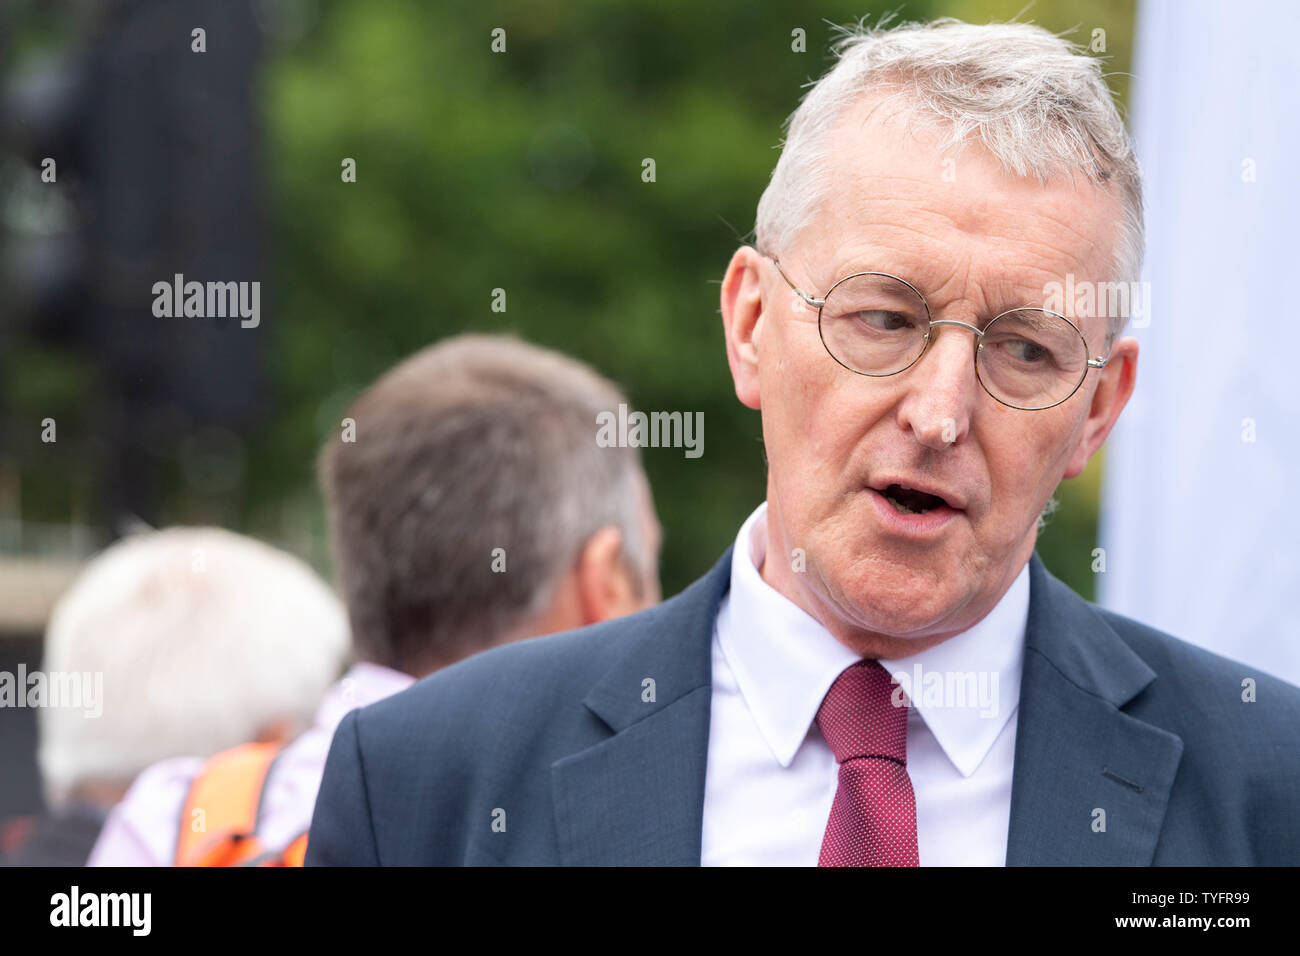 London, UK. 26th June 2019. The Time is now Climate Change mass lobby of MP's Hilary Benn MP Credit Ian Davidson/Alamy Live News Stock Photo